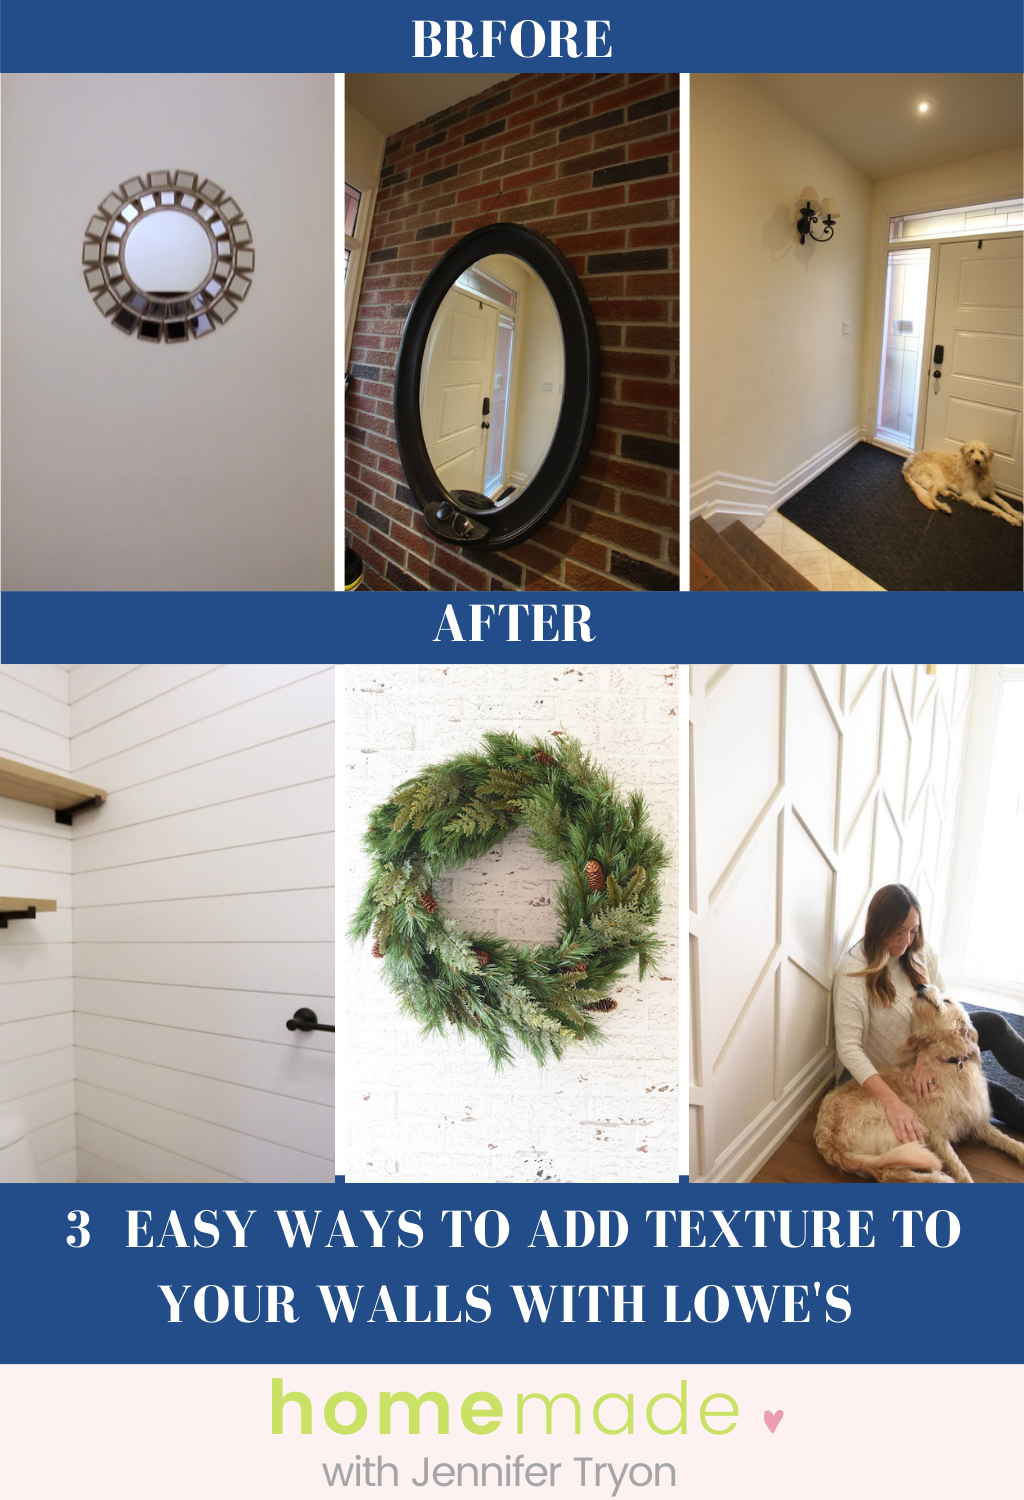 3 easy ways to add texture to your walls with lowe's